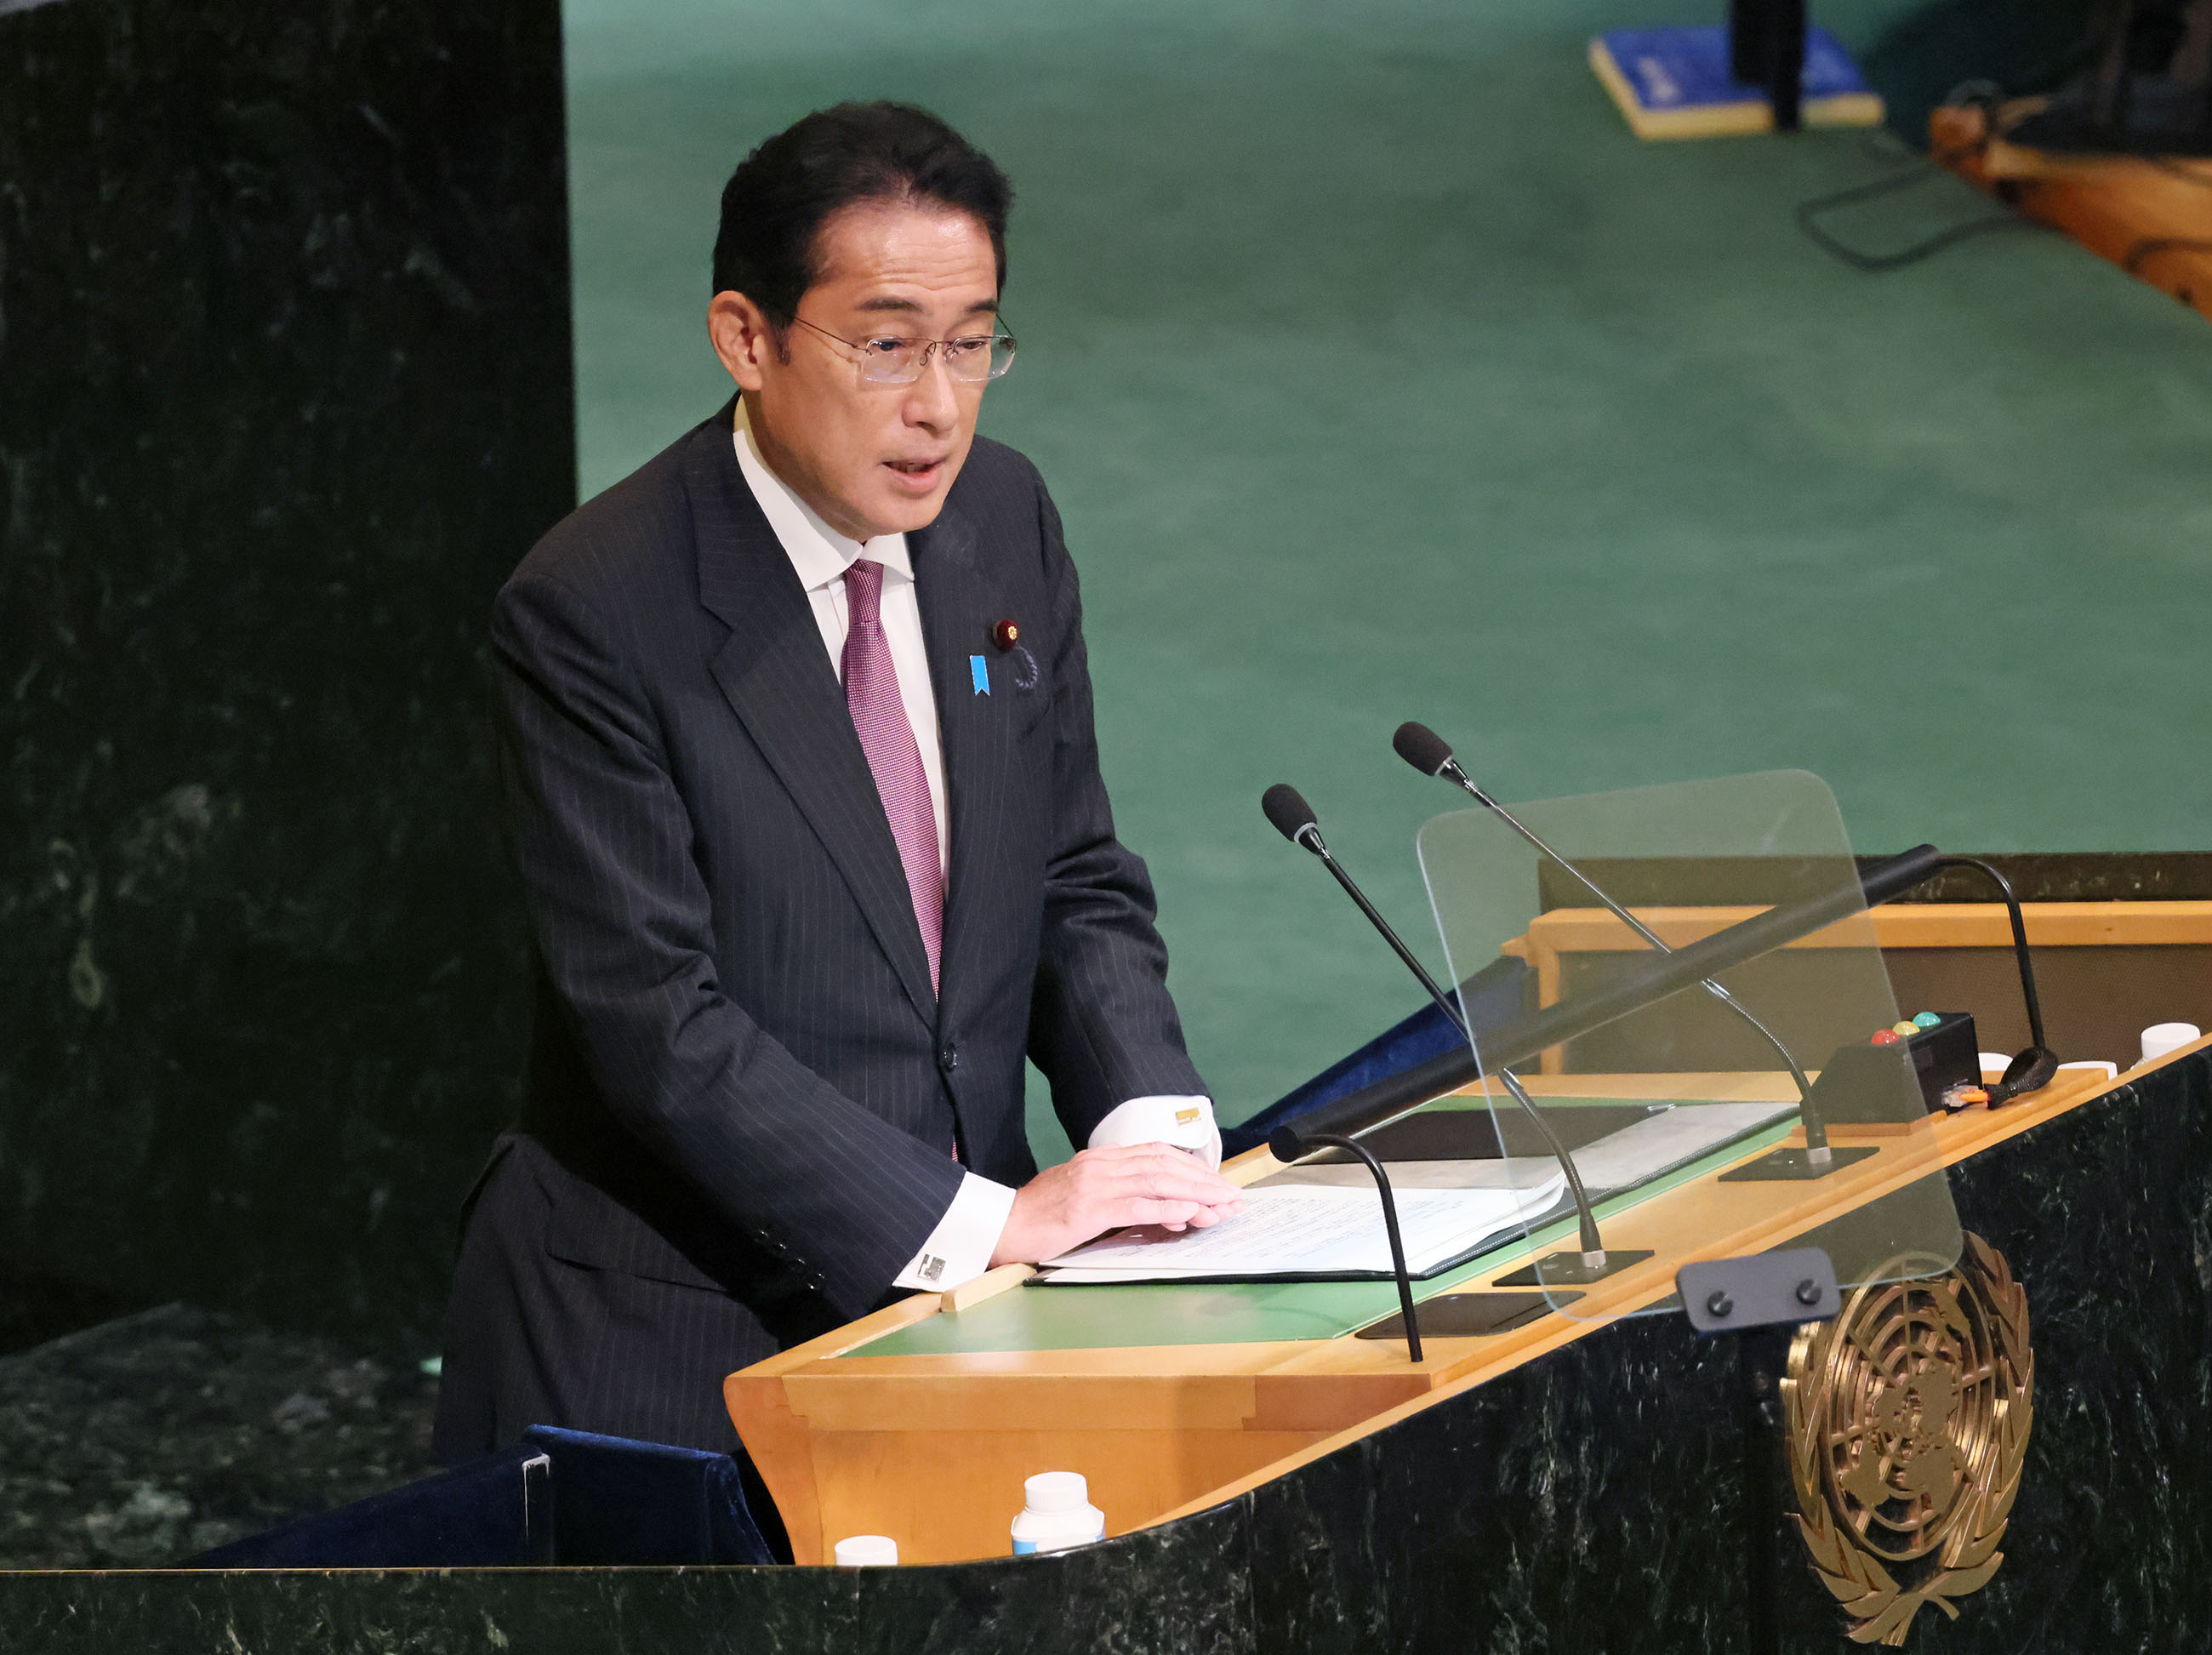 Photograph of the Prime Minister delivering an address at the United Nations General Assembly (7)